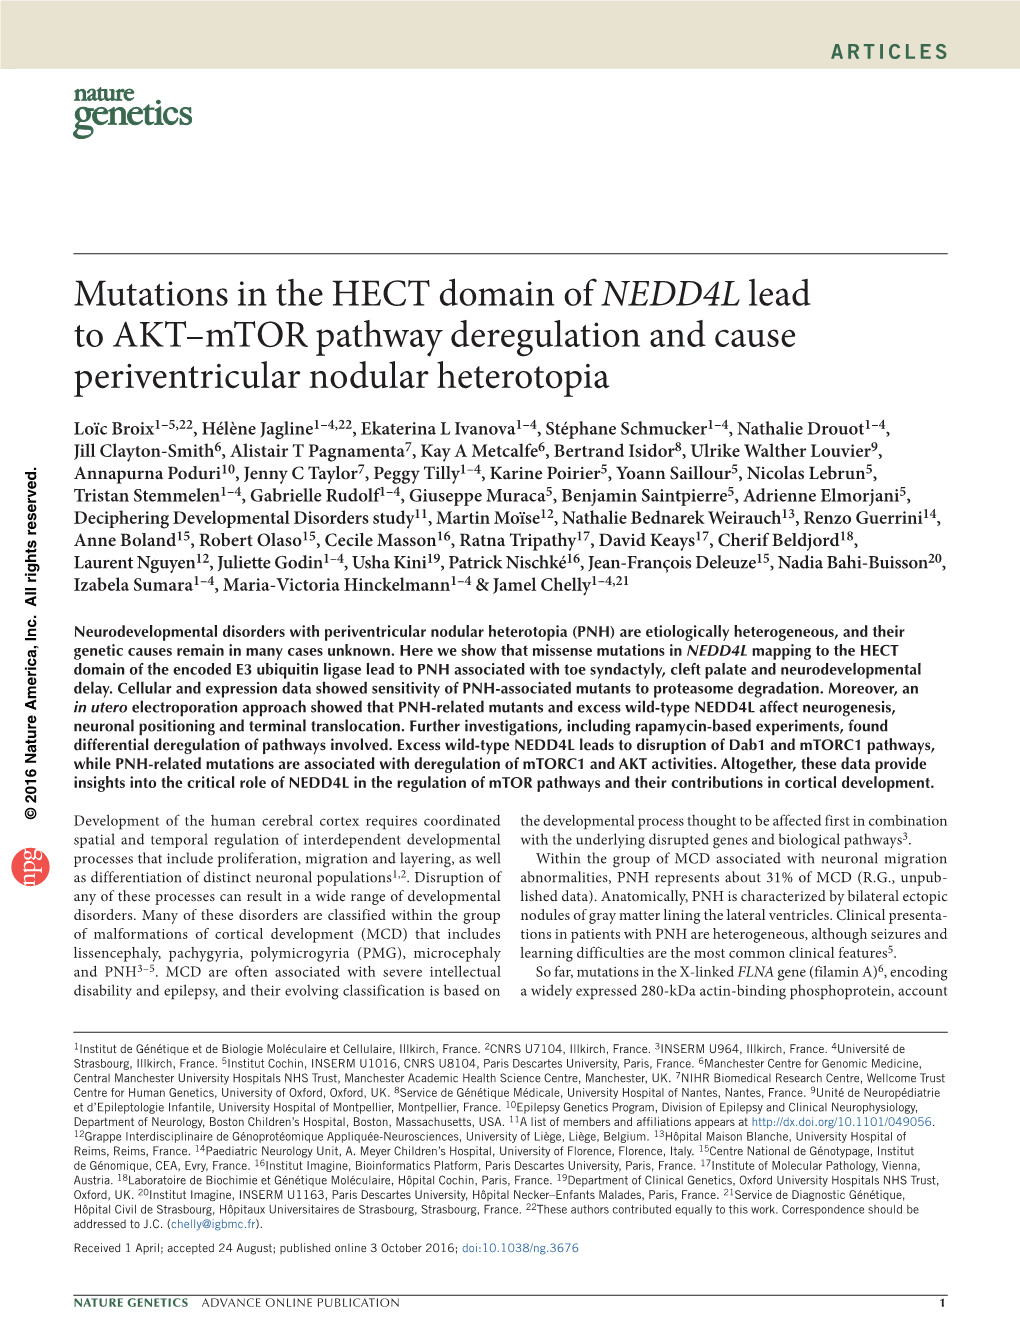 Mutations in the HECT Domain of NEDD4L Lead to AKT–Mtor